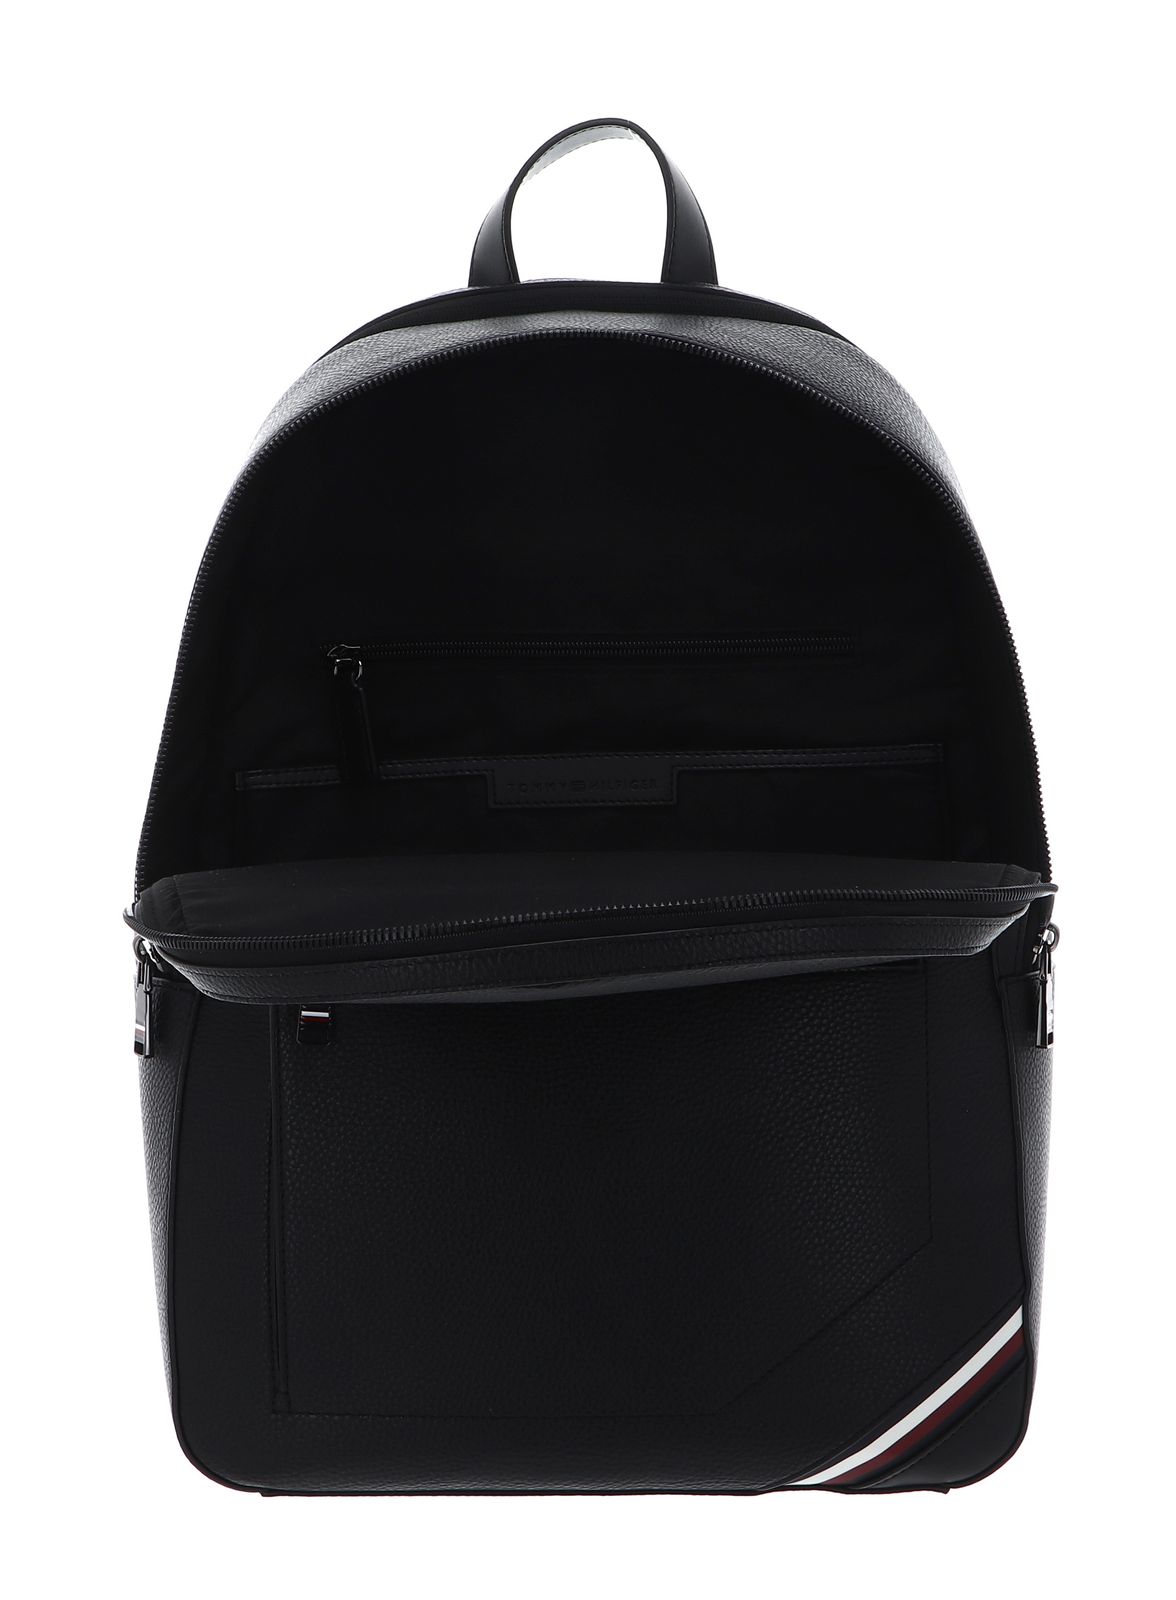 TOMMY HILFIGER backpack TH Central Backpack Black | Buy bags, purses ...